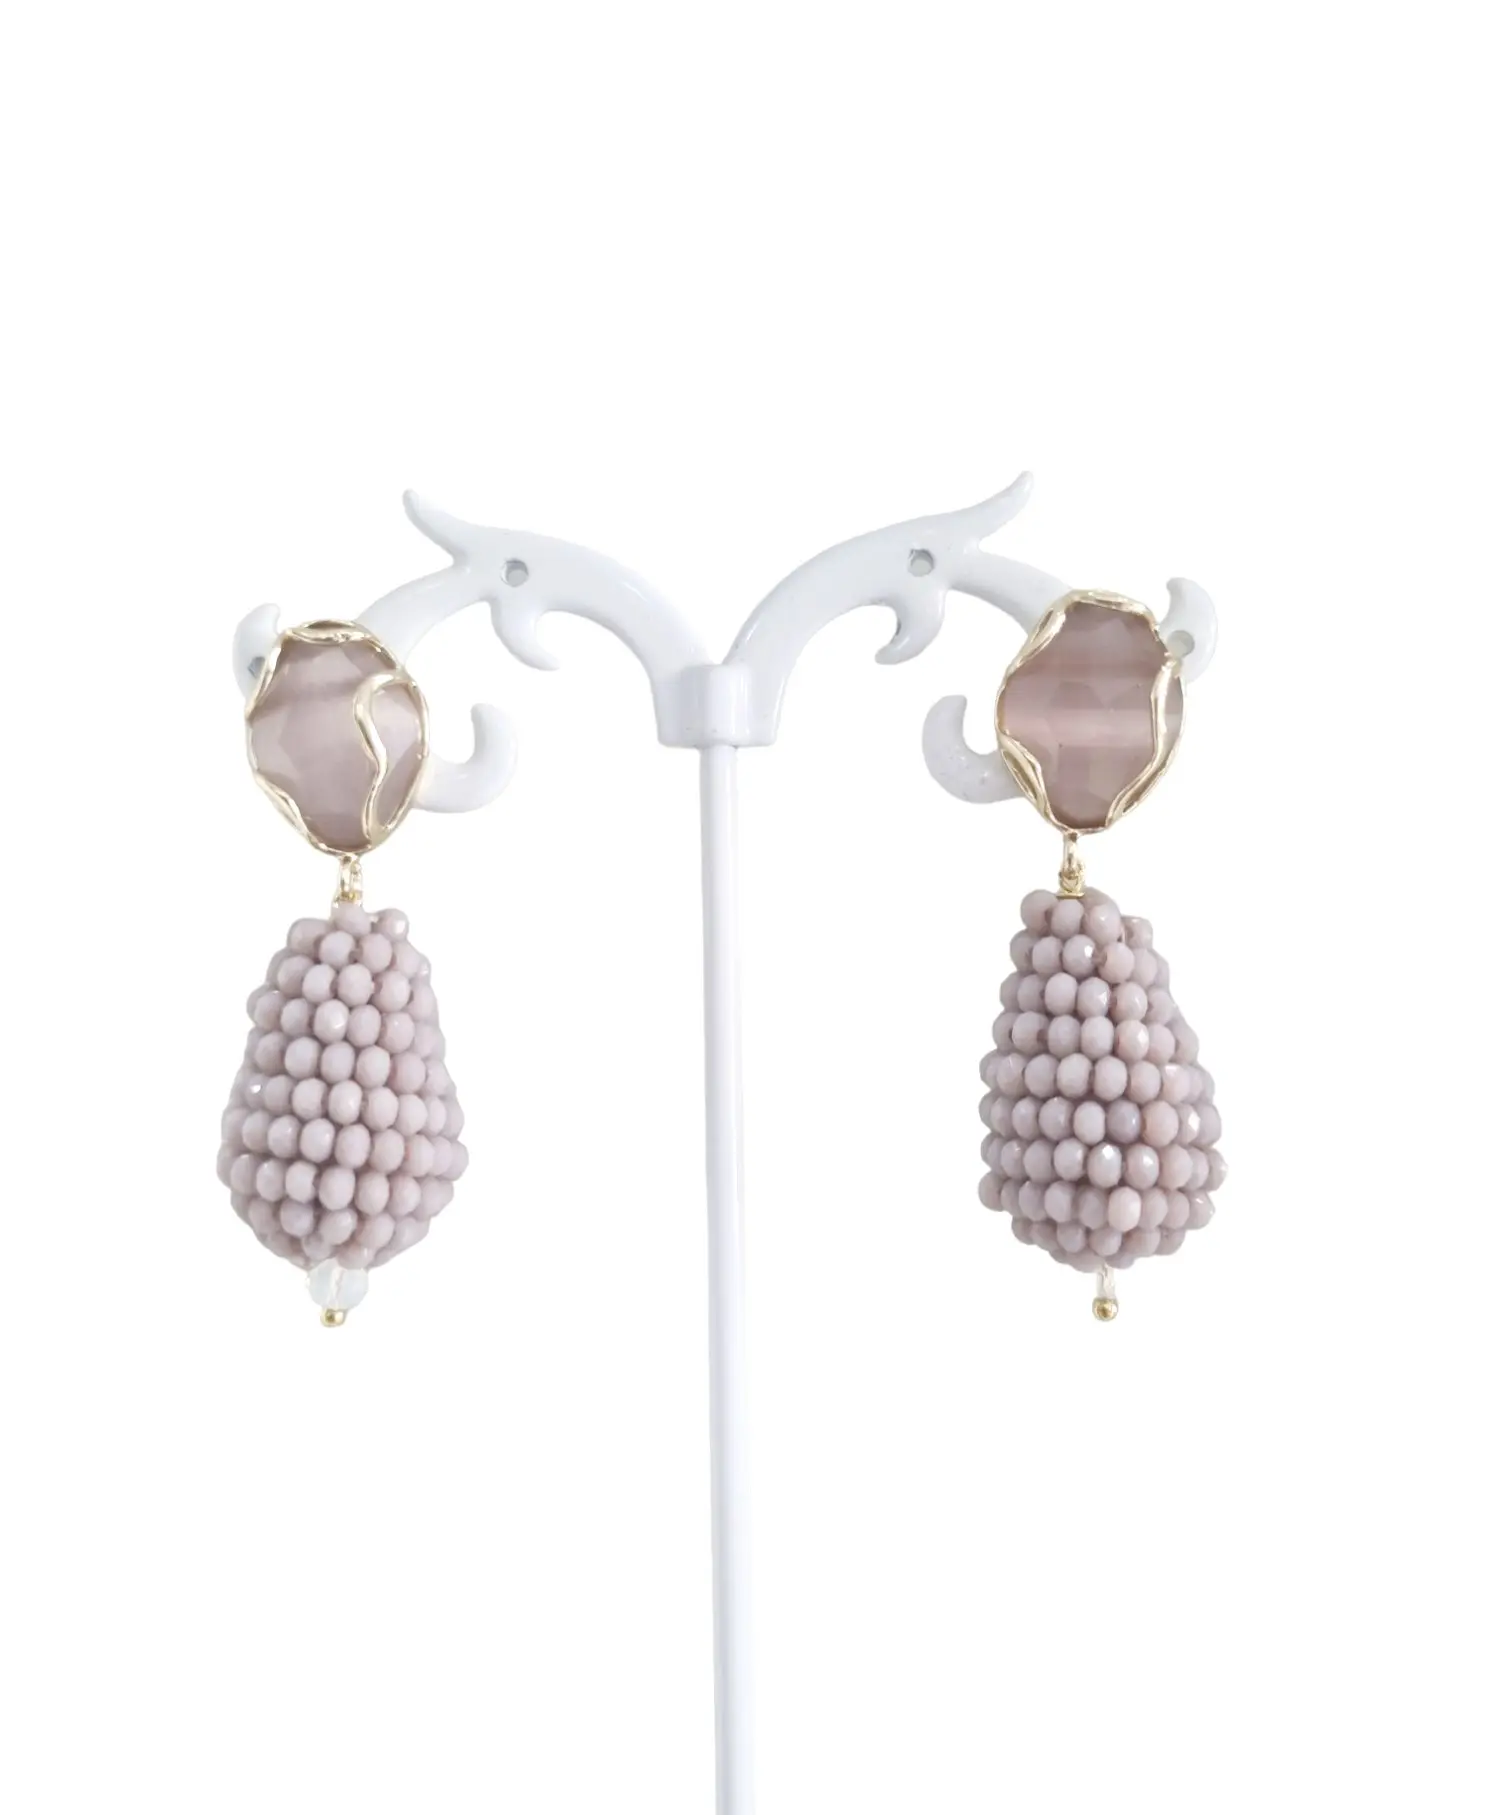 Earrings made with cat's eye stud surrounded by brass and drop with crystals. powder colorWeight 6.8gLength 4.5cm